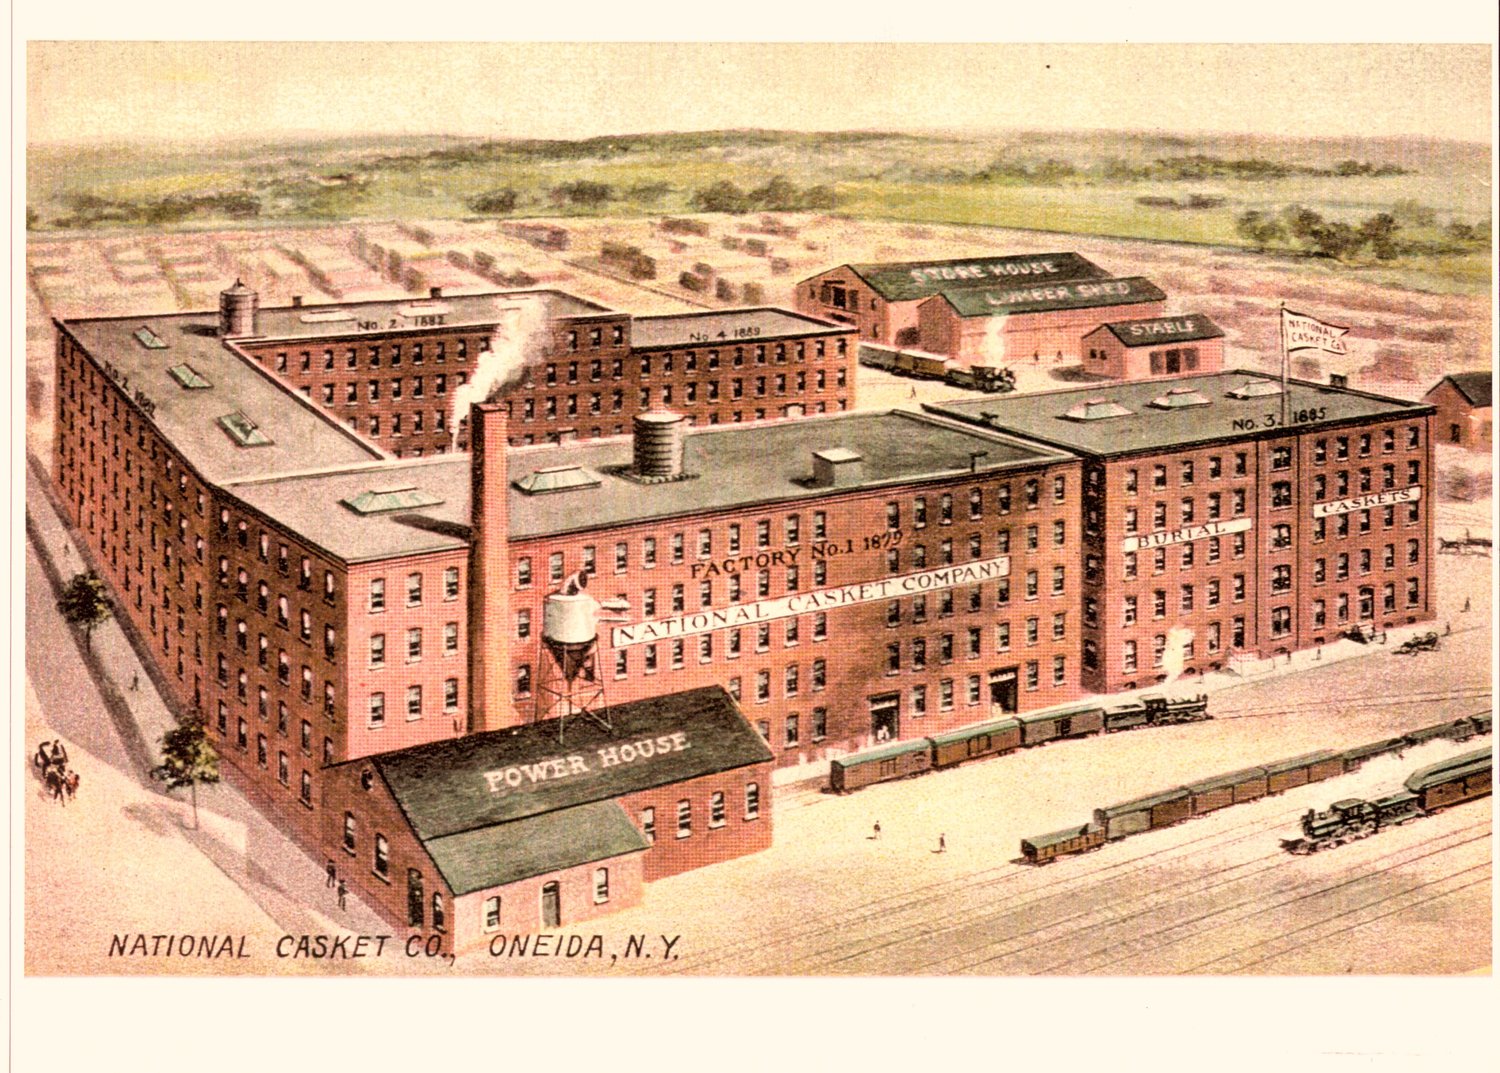 An old postcard depicts the National Casket Company factory in Oneida, once one of the premier companies of its kind in the United States.